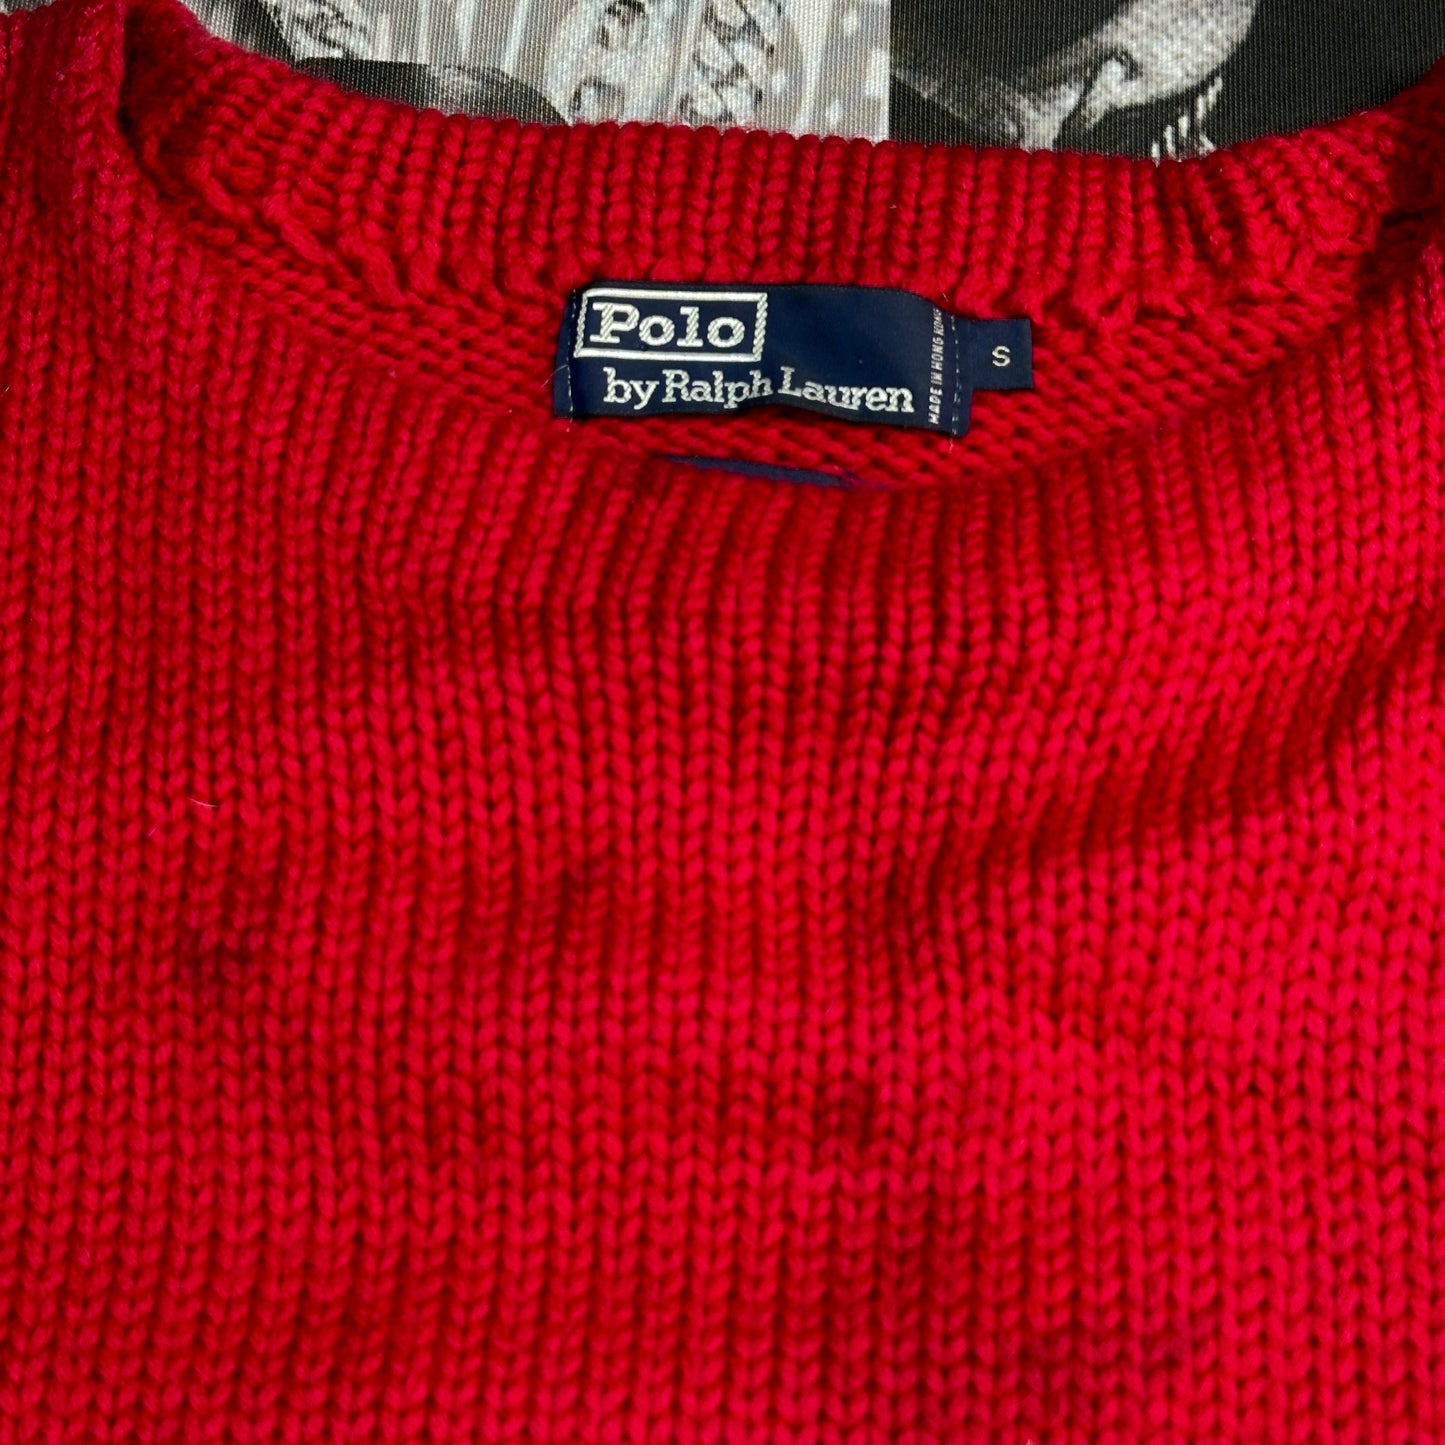 Vintage 80's Polo Ralph Lauren Knit Wool Sweater Size Small